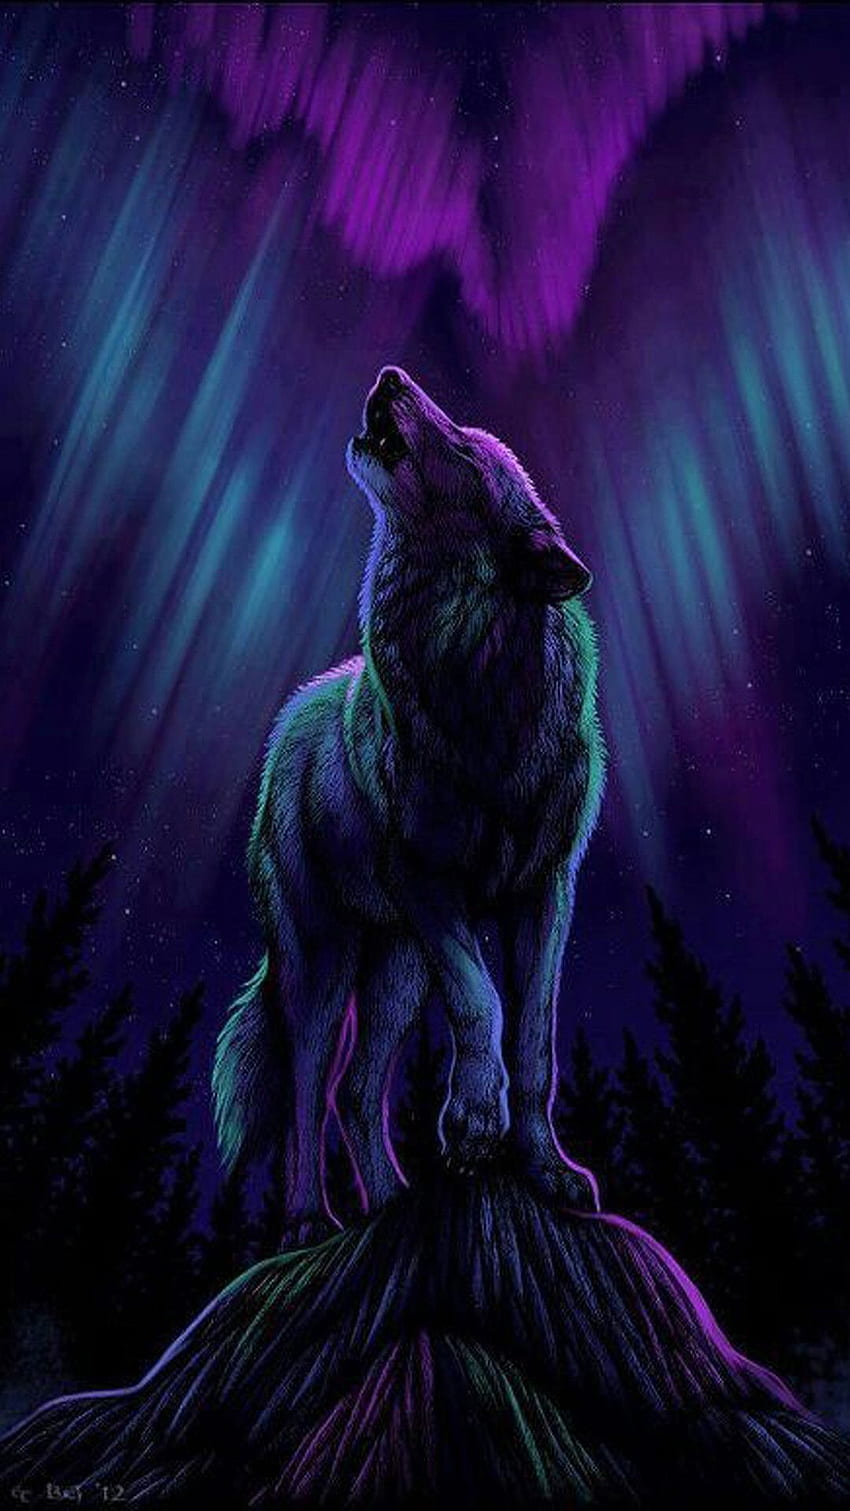 IPhone wallpaper of a wolf howling at the Northern Lights. - Wolf